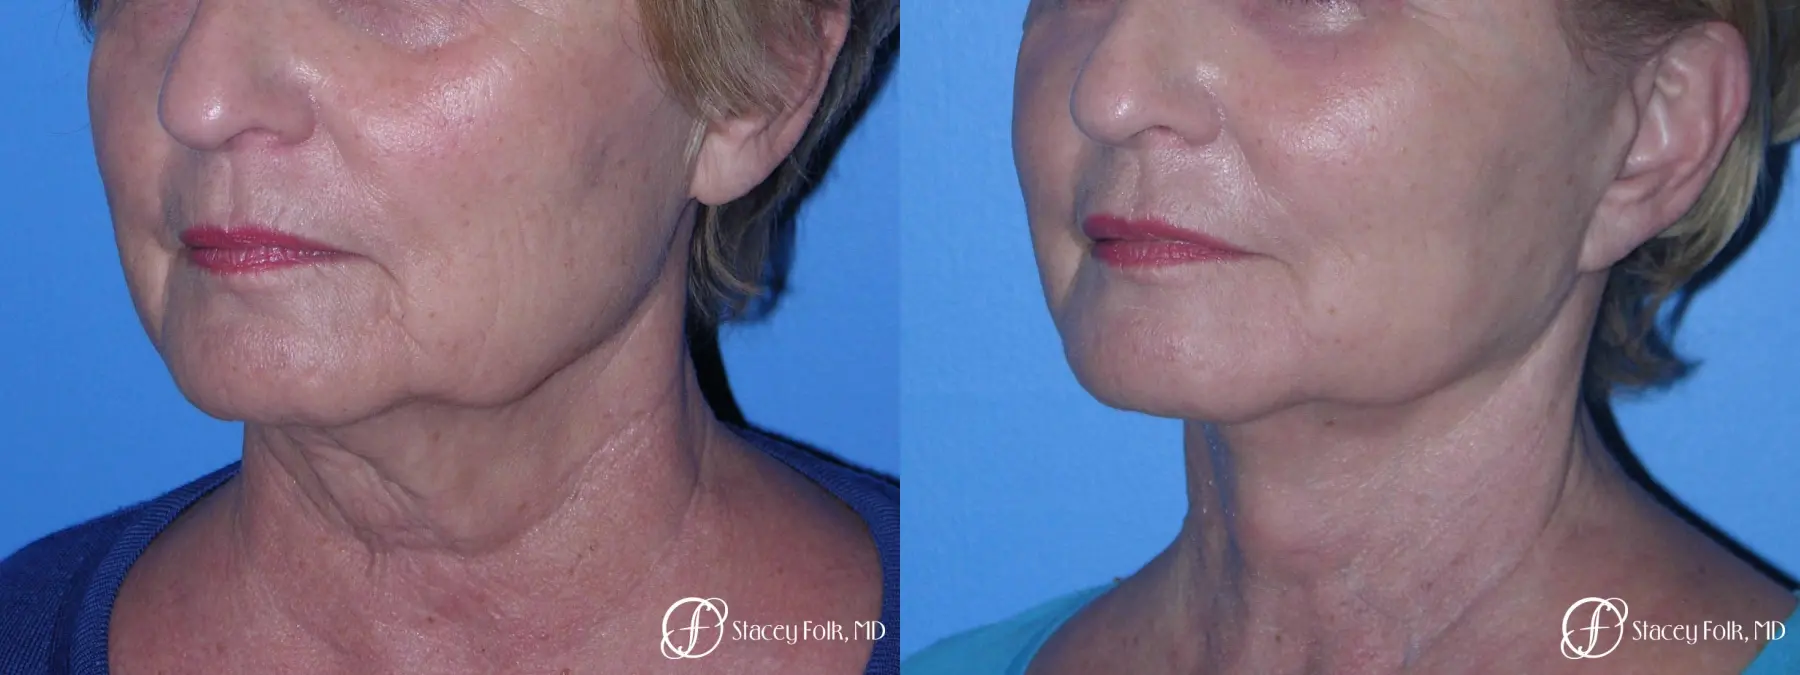 Denver Facial Rejuvenation Face Lift, Fat Injections, and Laser Resurfacing 7120 - Before and After 2